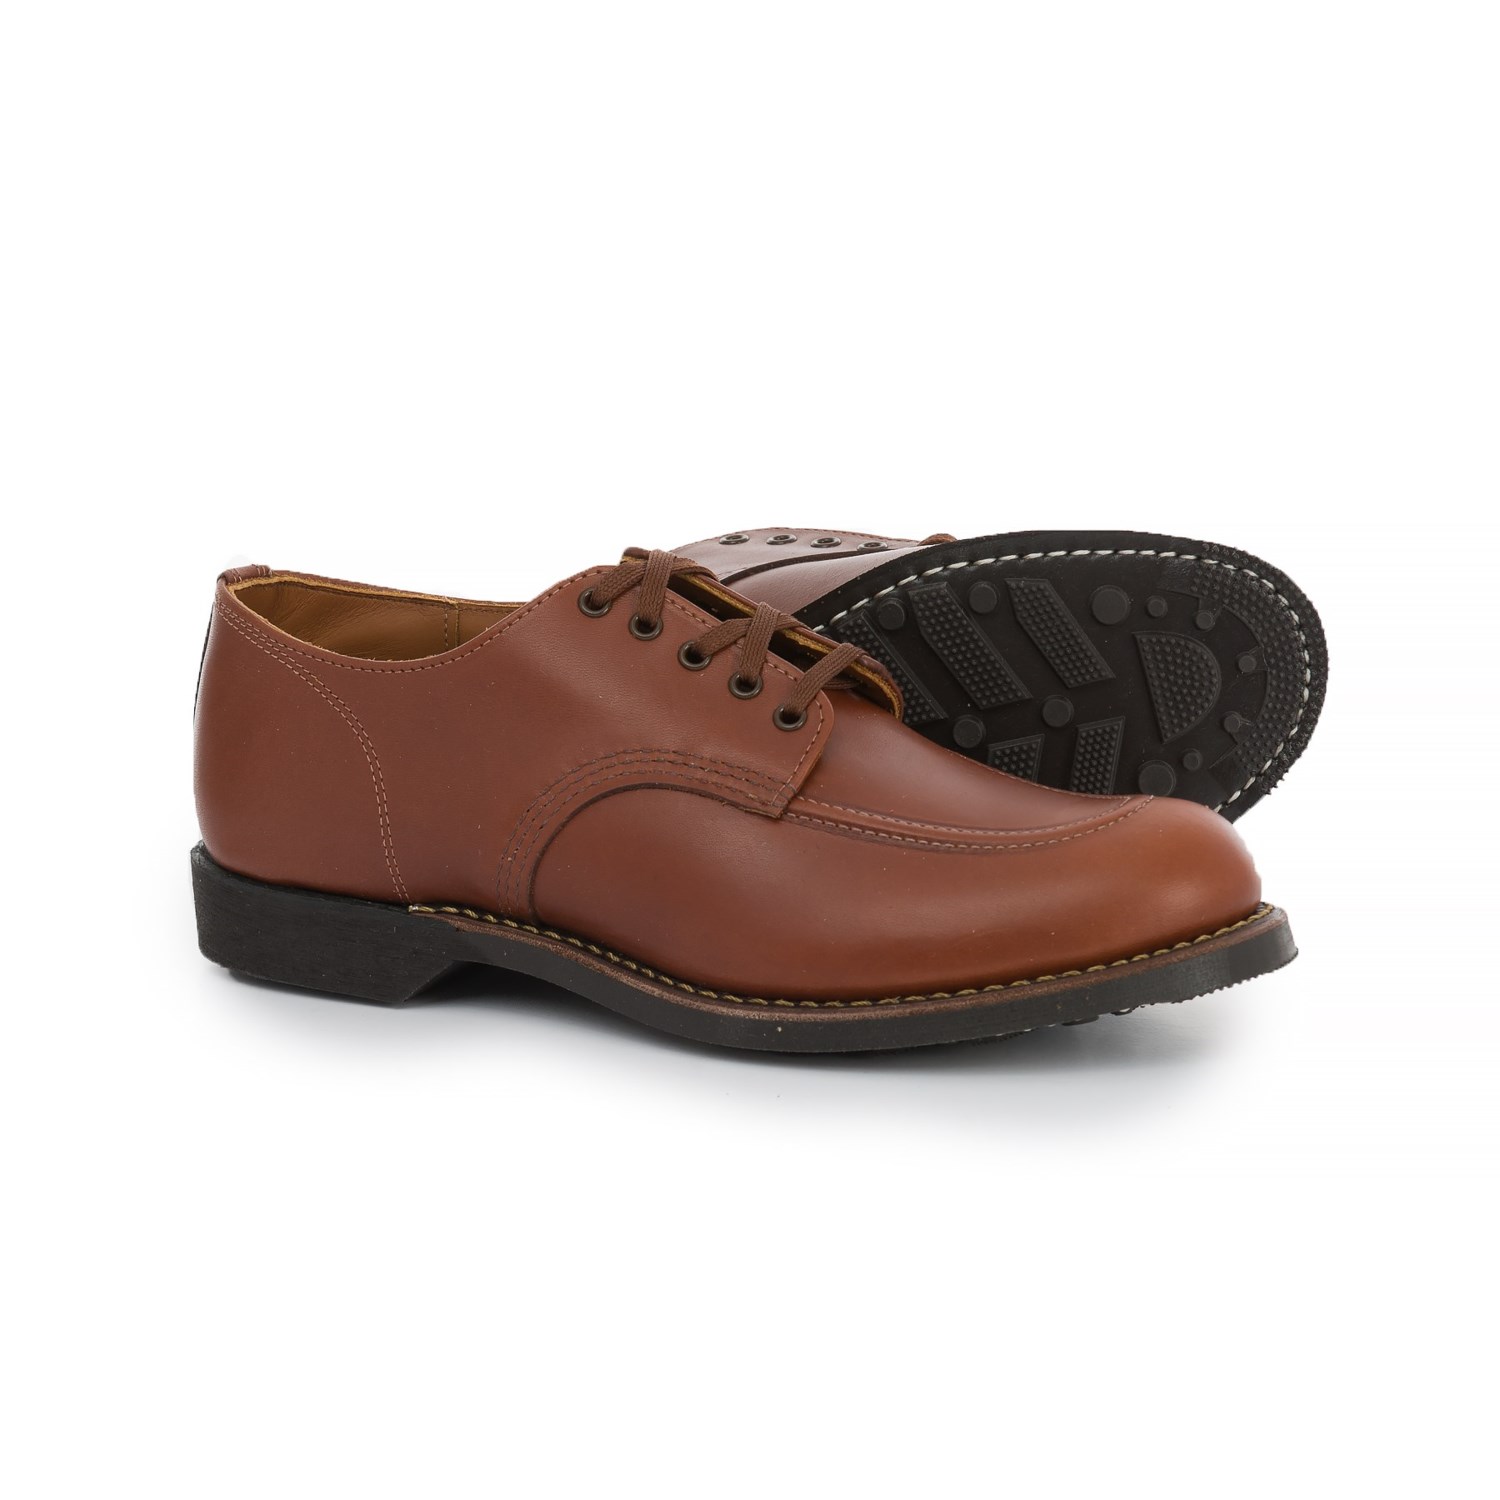 Red Wing Shoes Sport Leather Oxford Shoes – Factory 2nds (For Men)